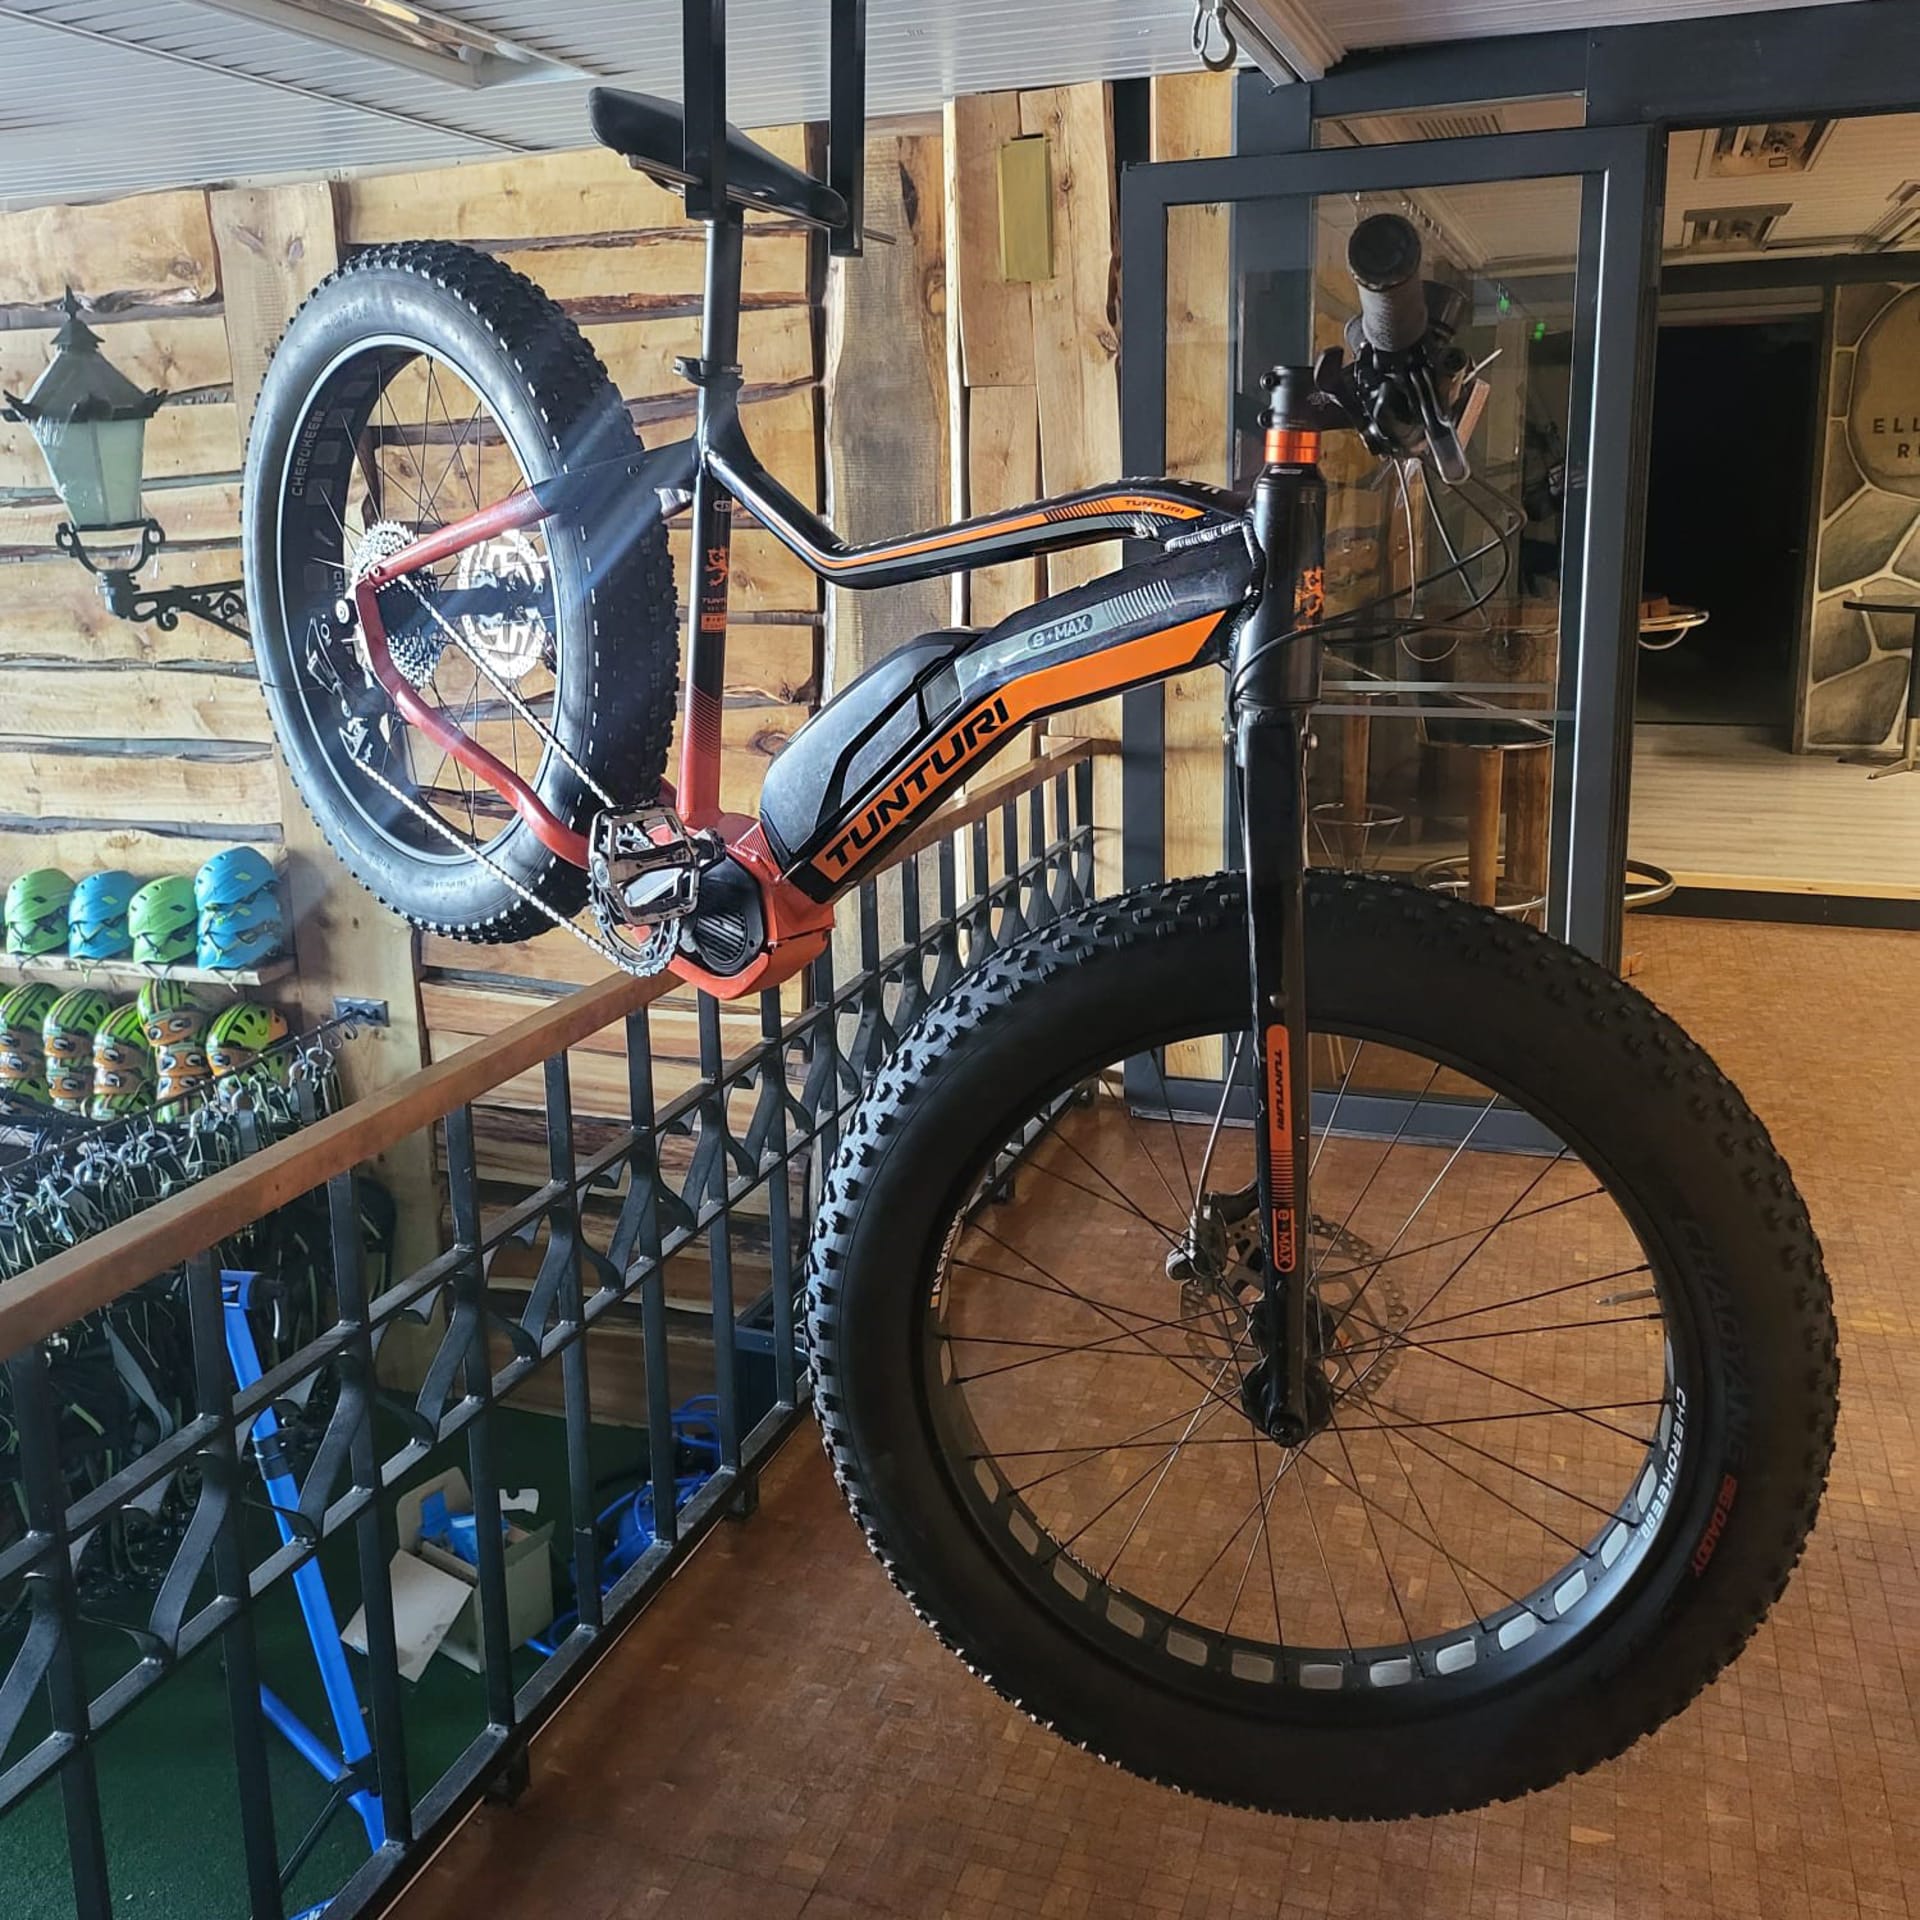 Tunturi's aluminum-framed eMAX mountain bike has a powerful electric motor with enough torque to effortlessly conquer even large hills.